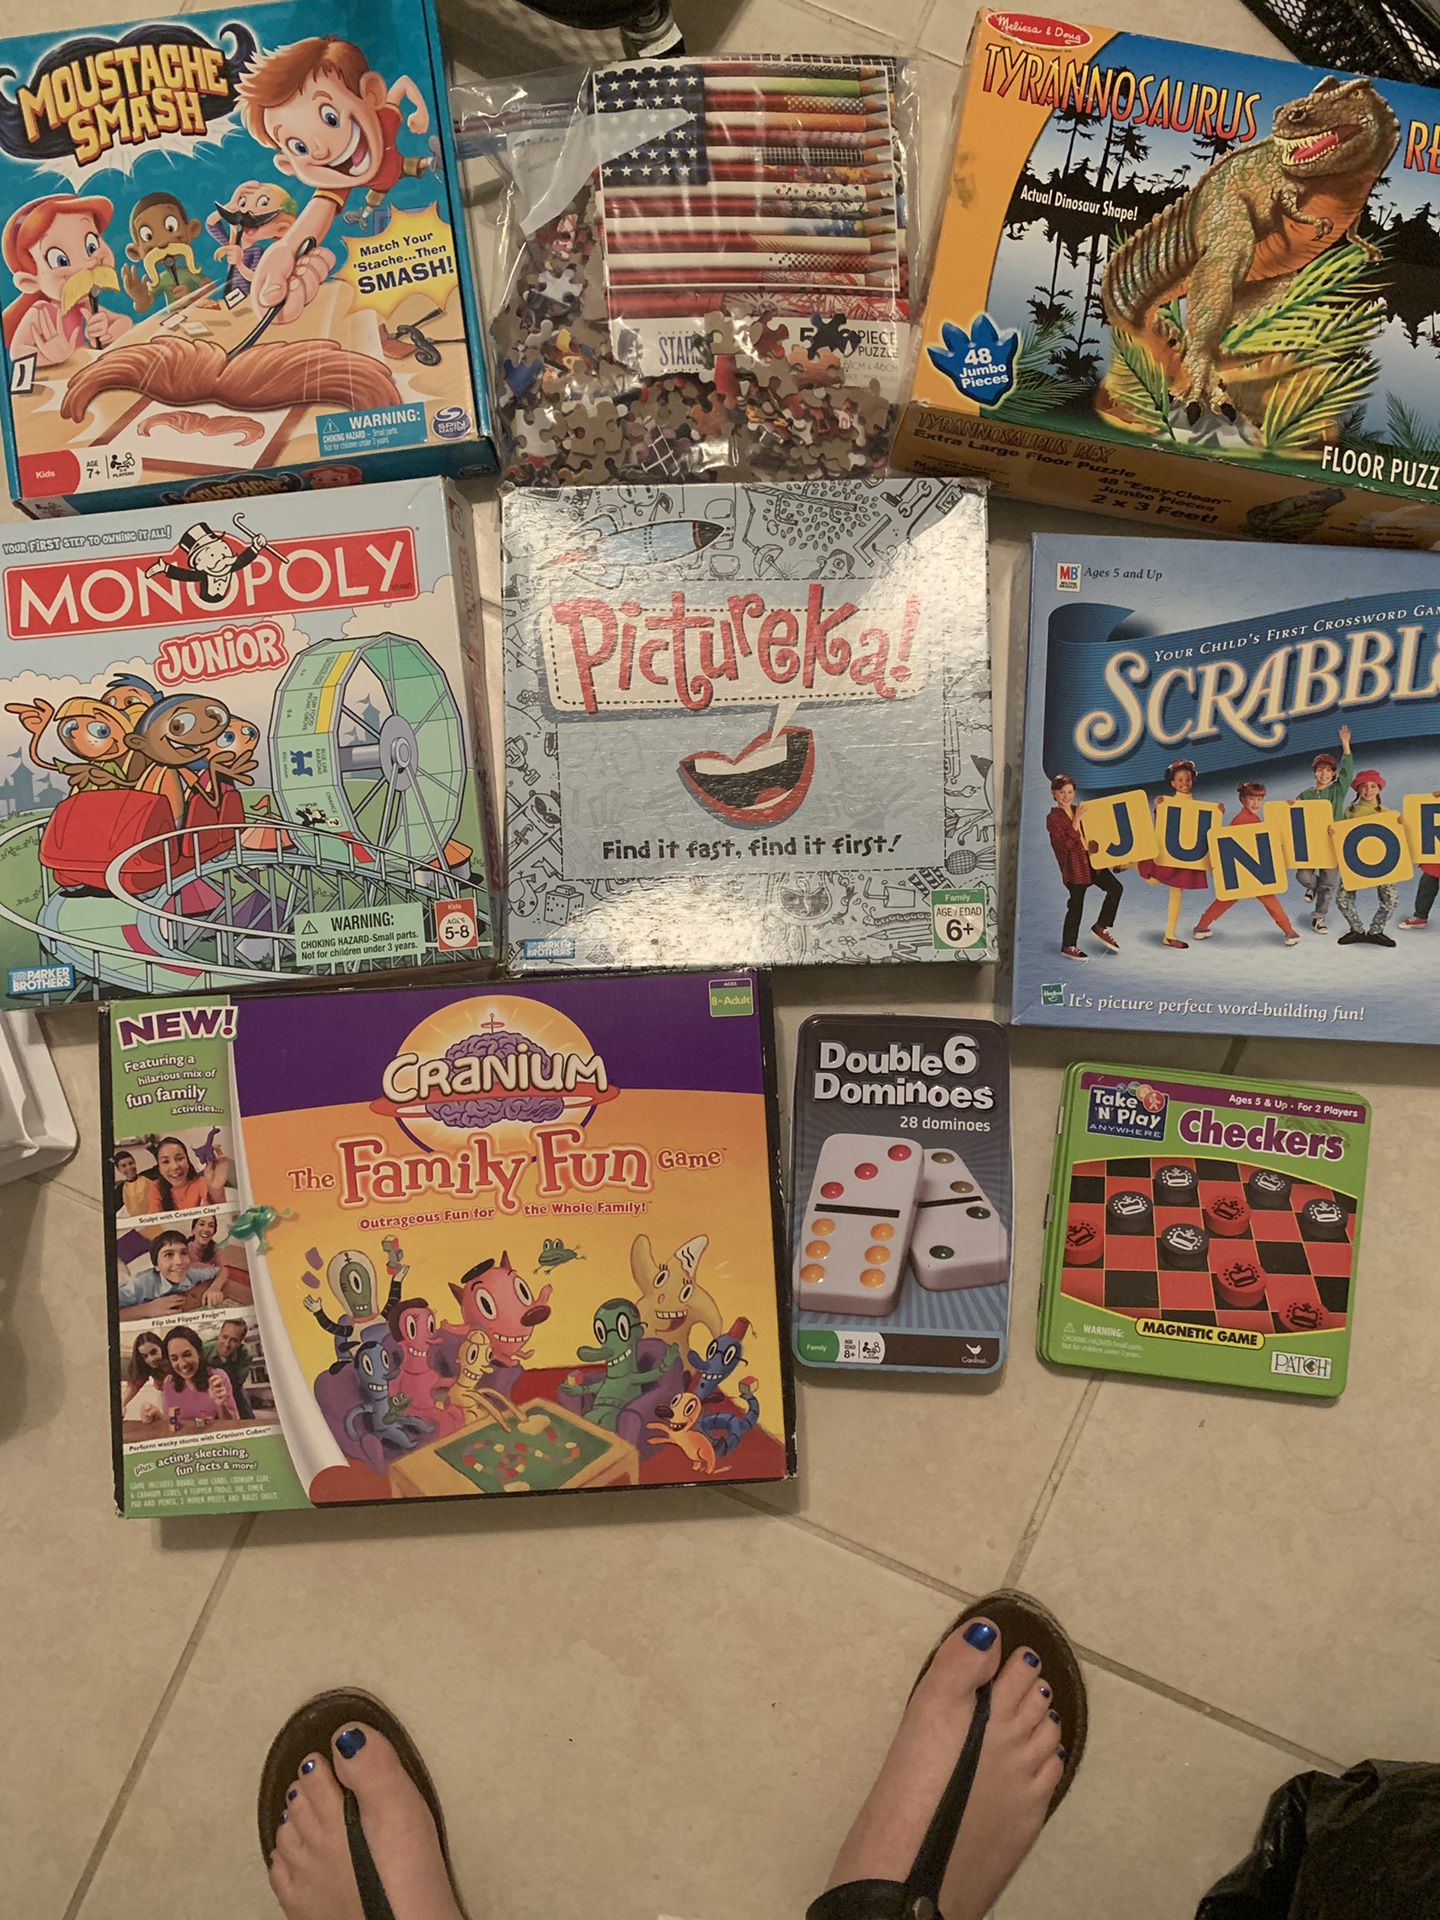 Board games and puzzles